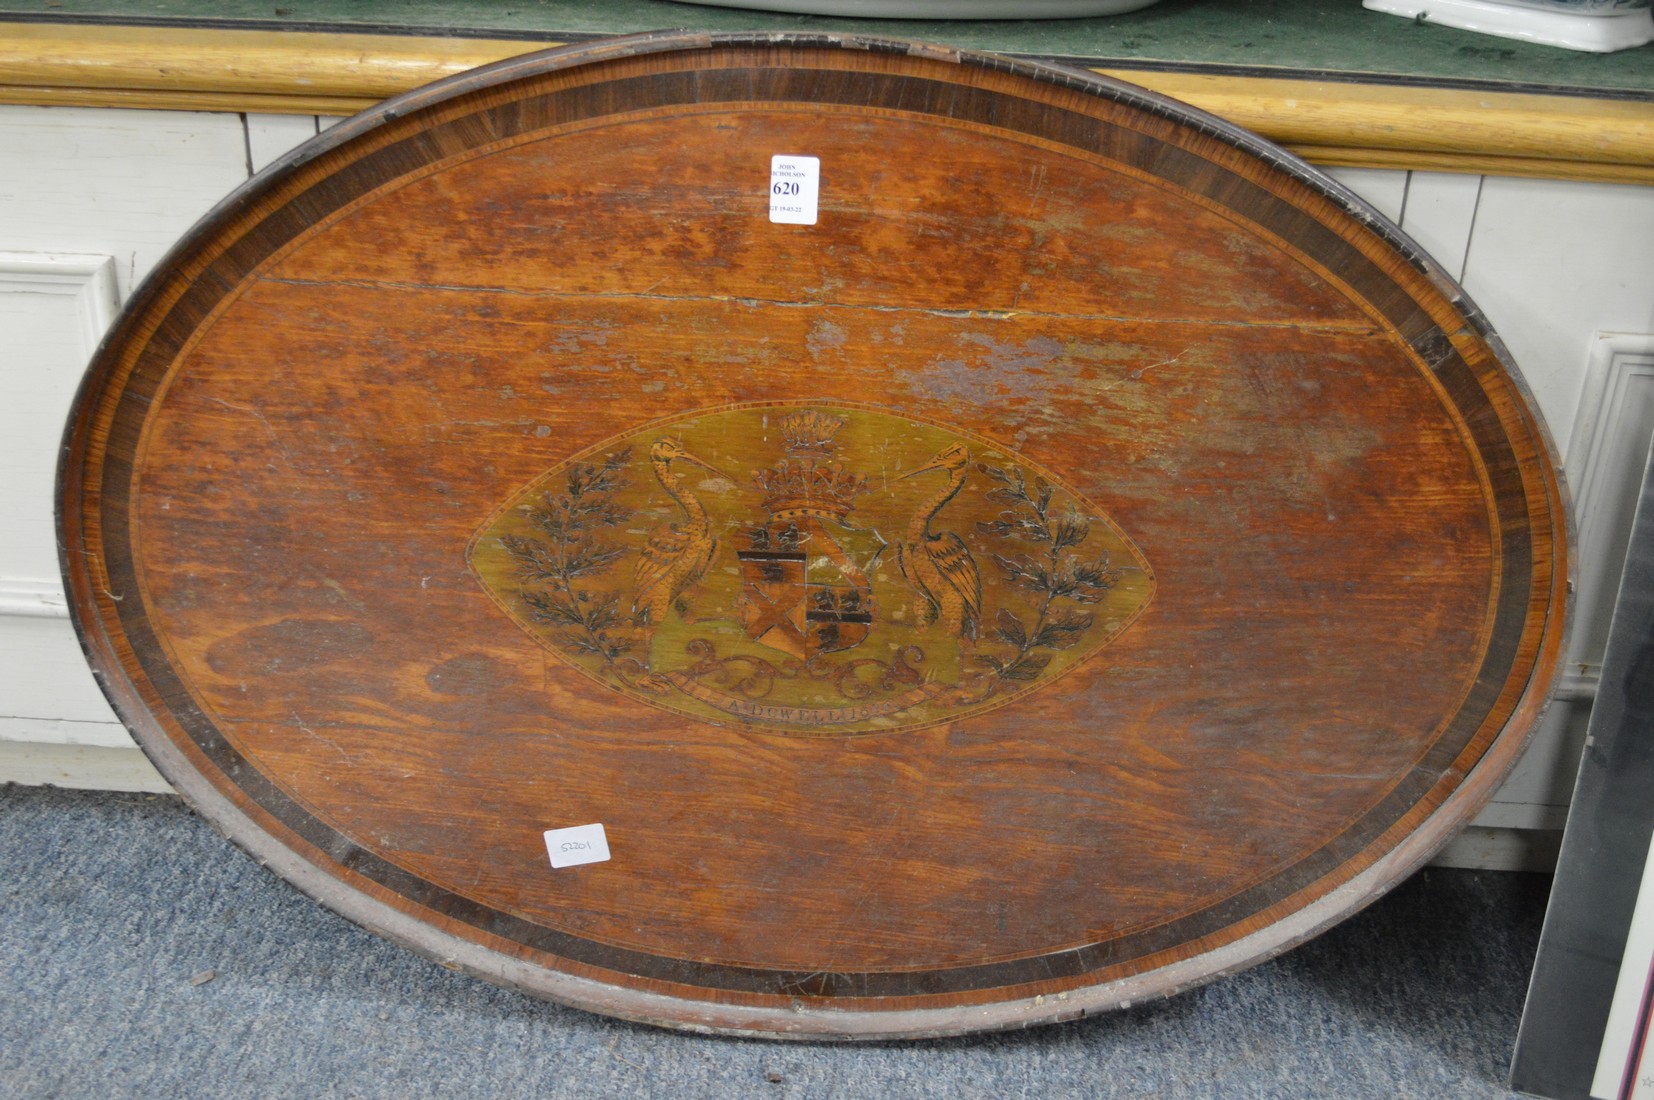 A 19th century oval mahogany tray inlaid with an armorial and crest (faults).